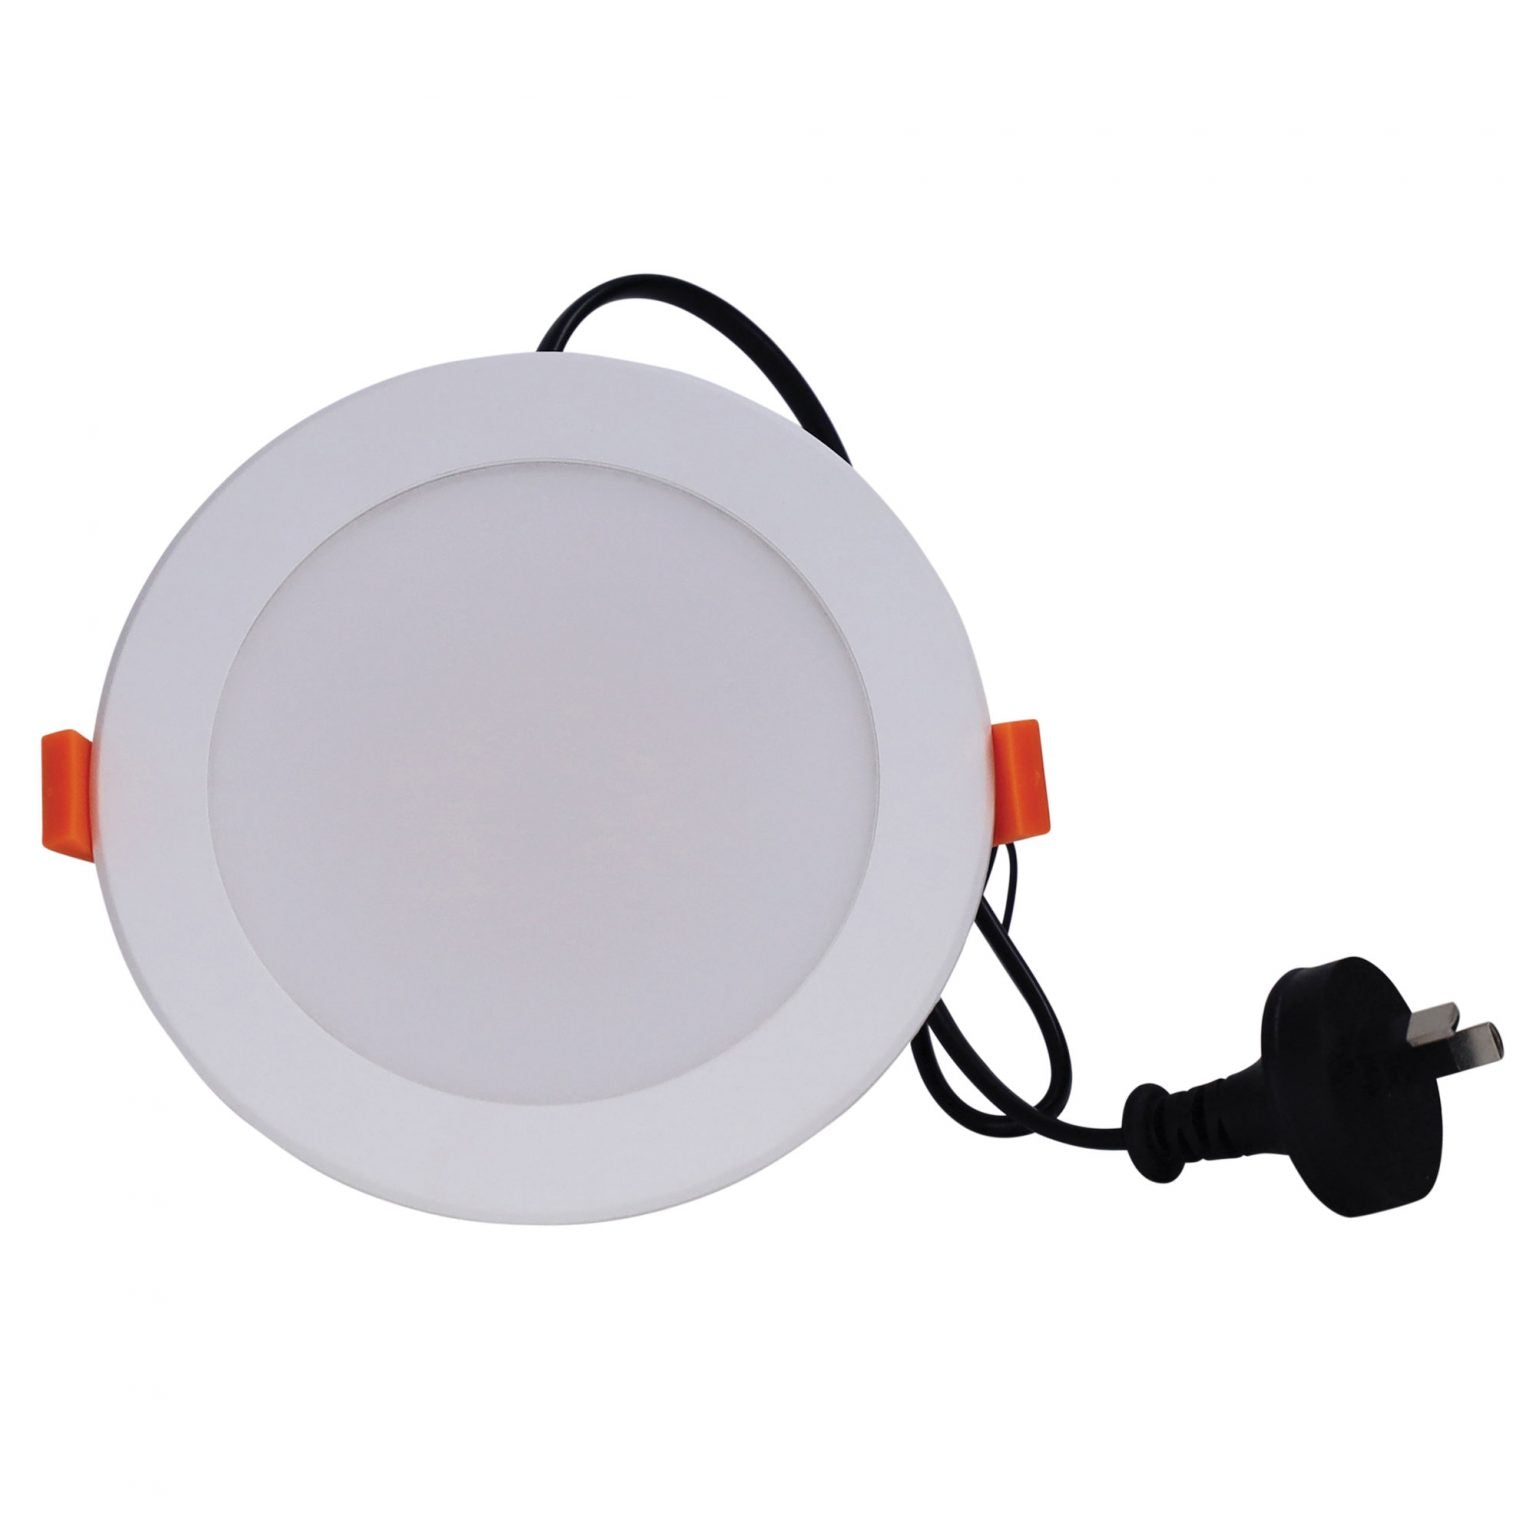 Qzao LED downlight RENO SUPERSTAR 10W Tri-Colour Selectable LED Downlight 90mm cut out QL106